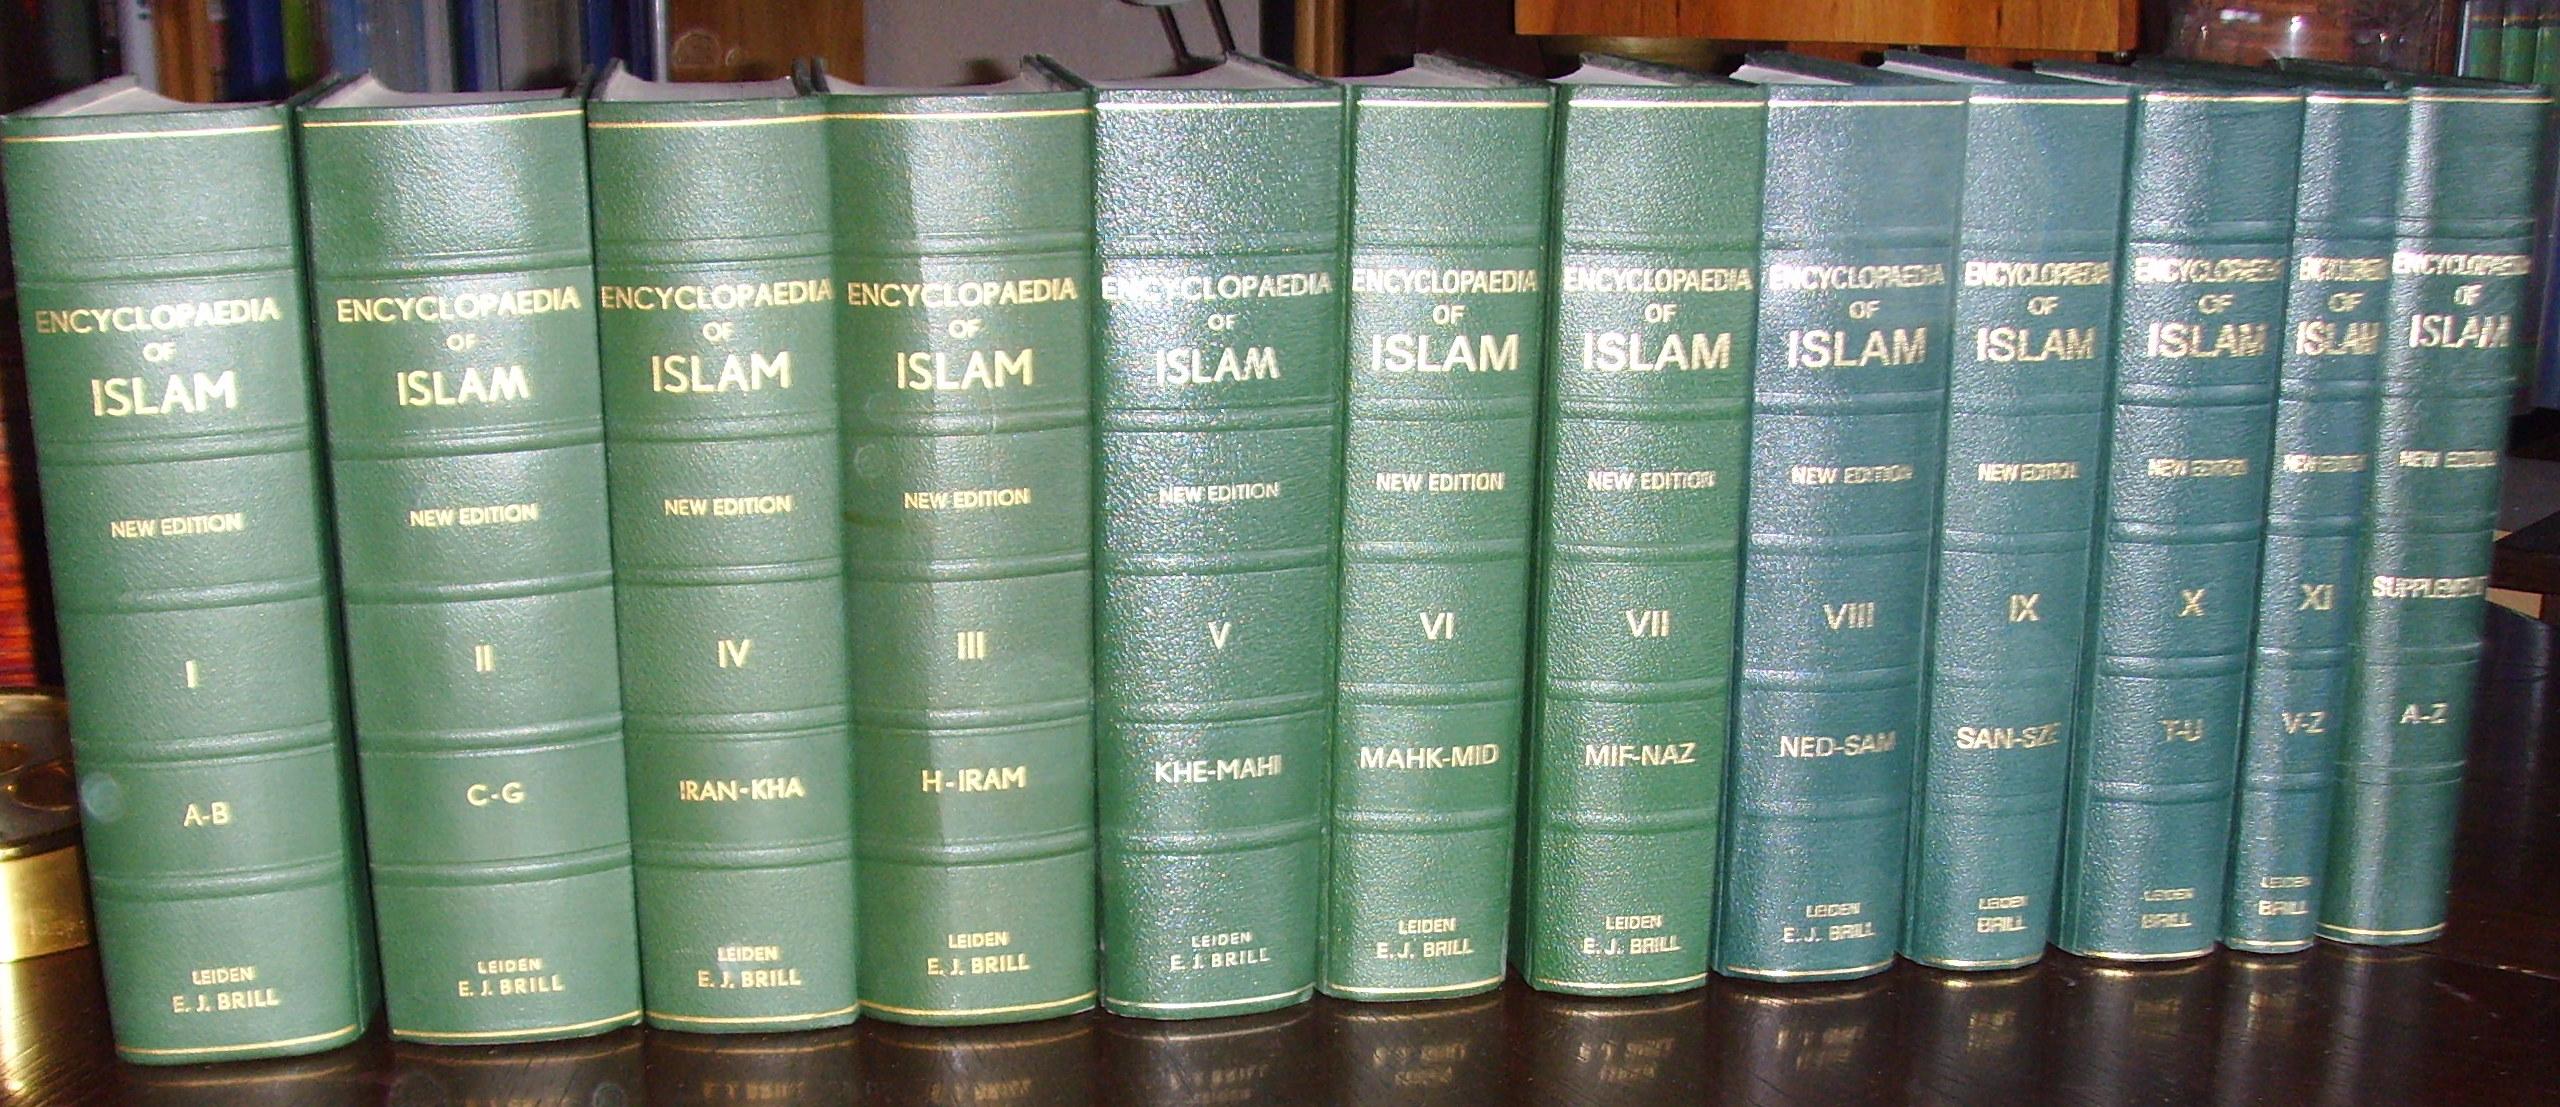 The Encyclopaedia of Islam. New Edition. Prepared by a number of leading Orientalists. 12 Vol. Vol. XII: Supplement A-Z.